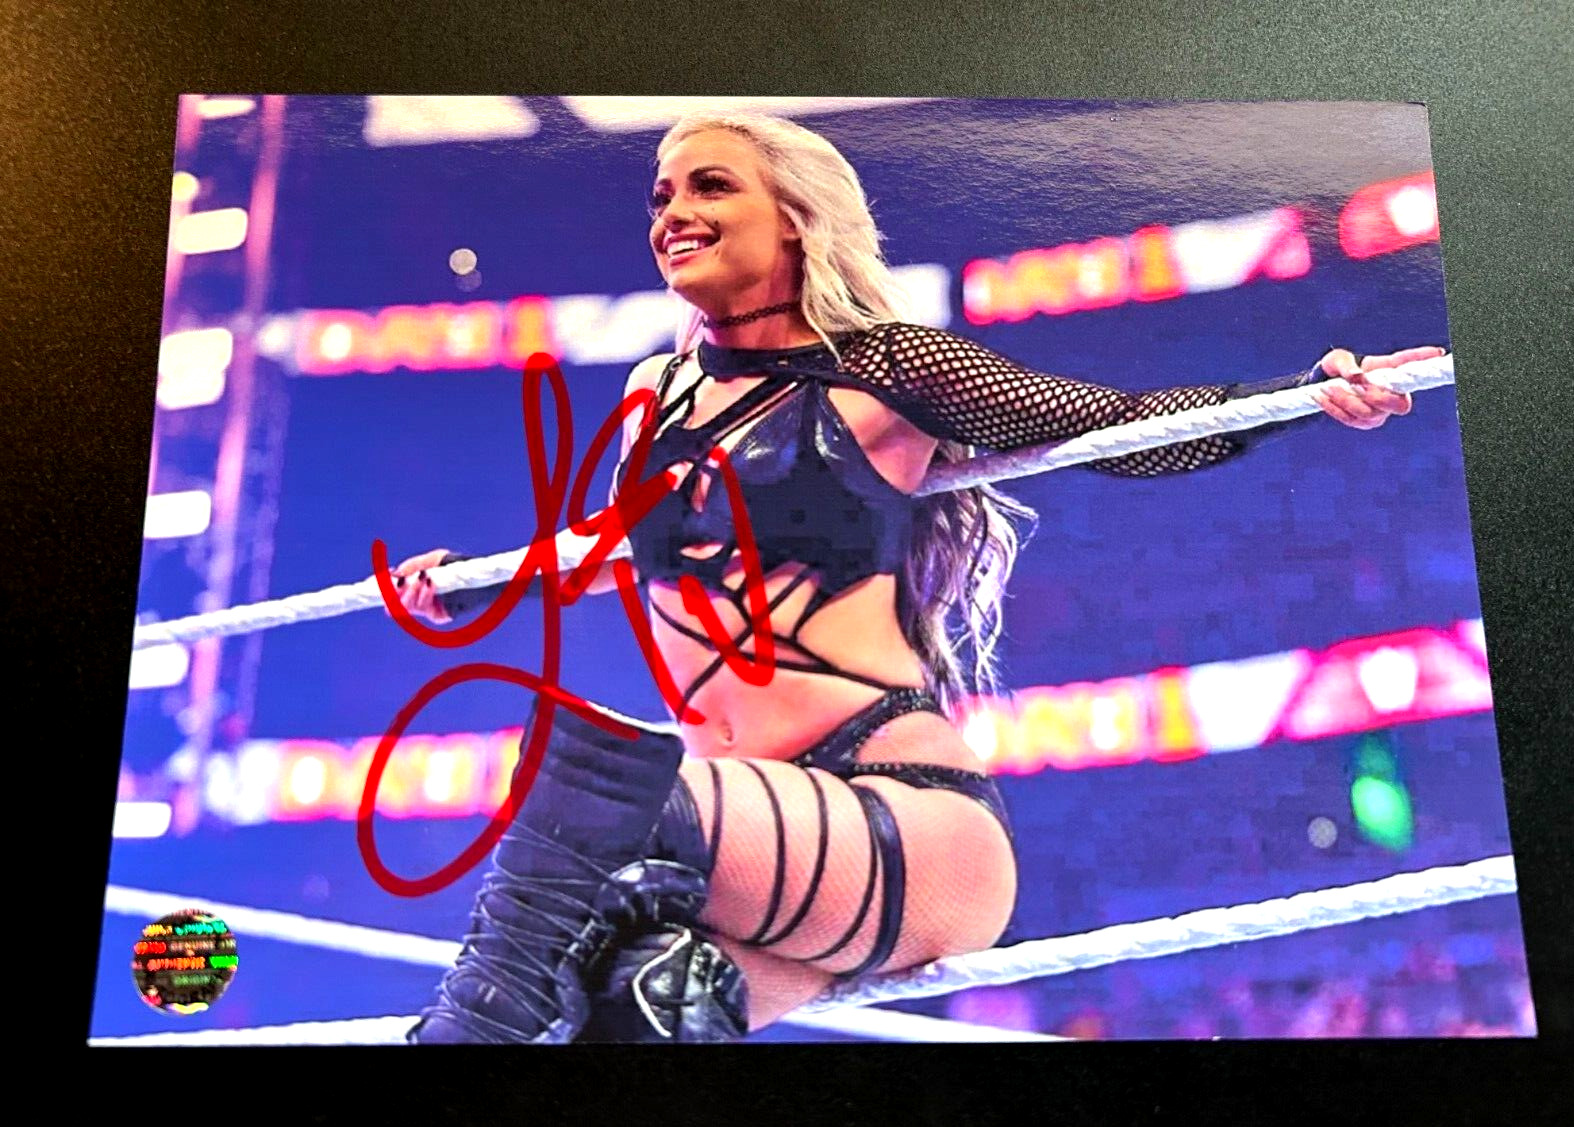 LIV MORGAN Signed (WWE World Champ RAW) Autograph 7x5 inch with COA